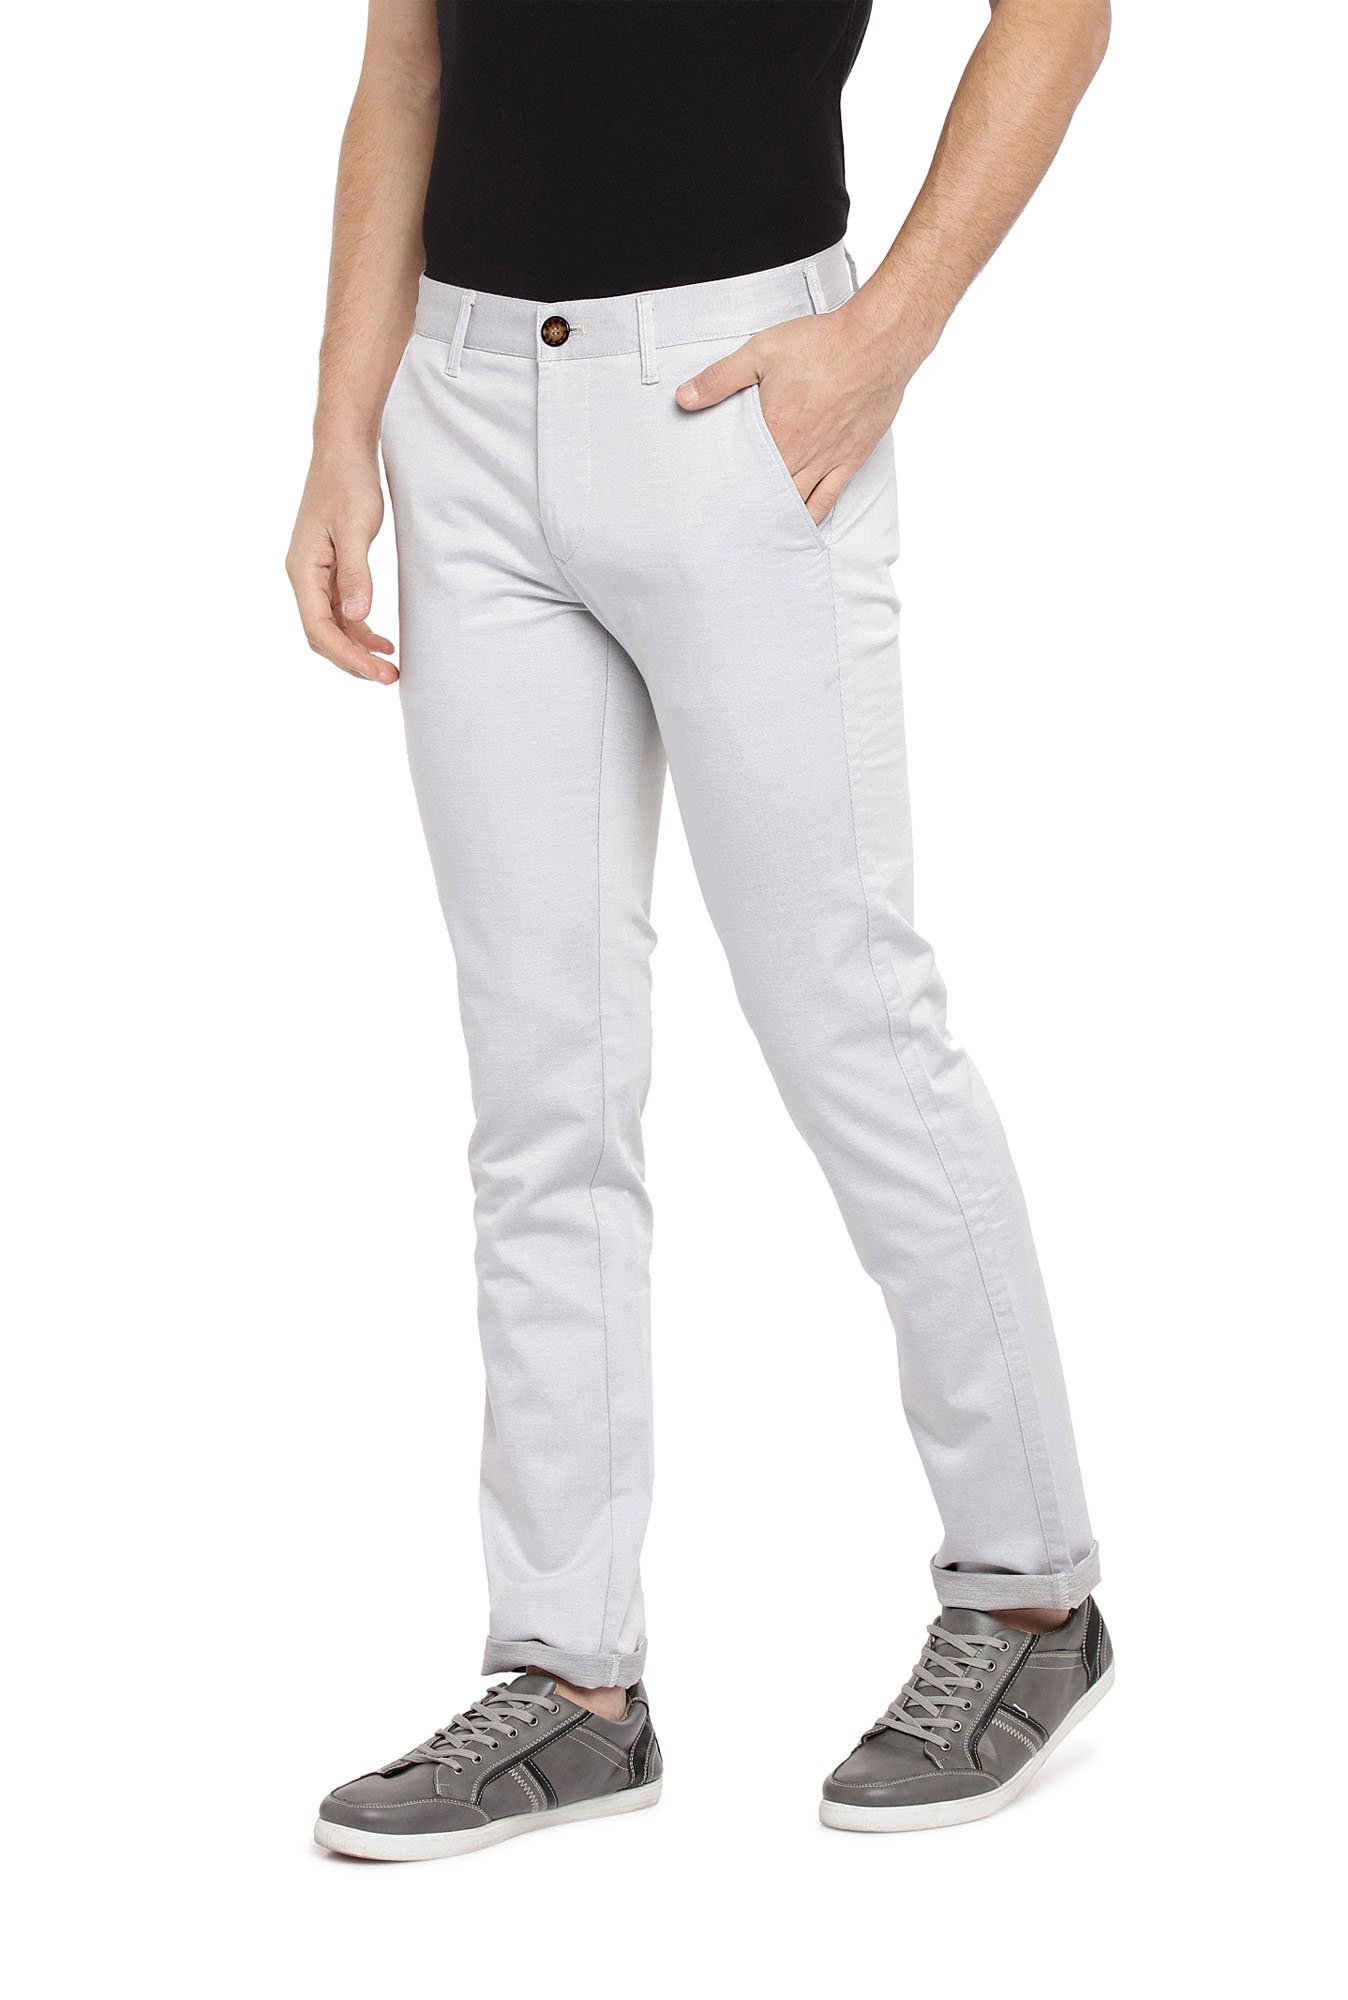 Buy IVOC White Regular Fit Cotton Flat Front Trousers for Mens Online   Tata CLiQ